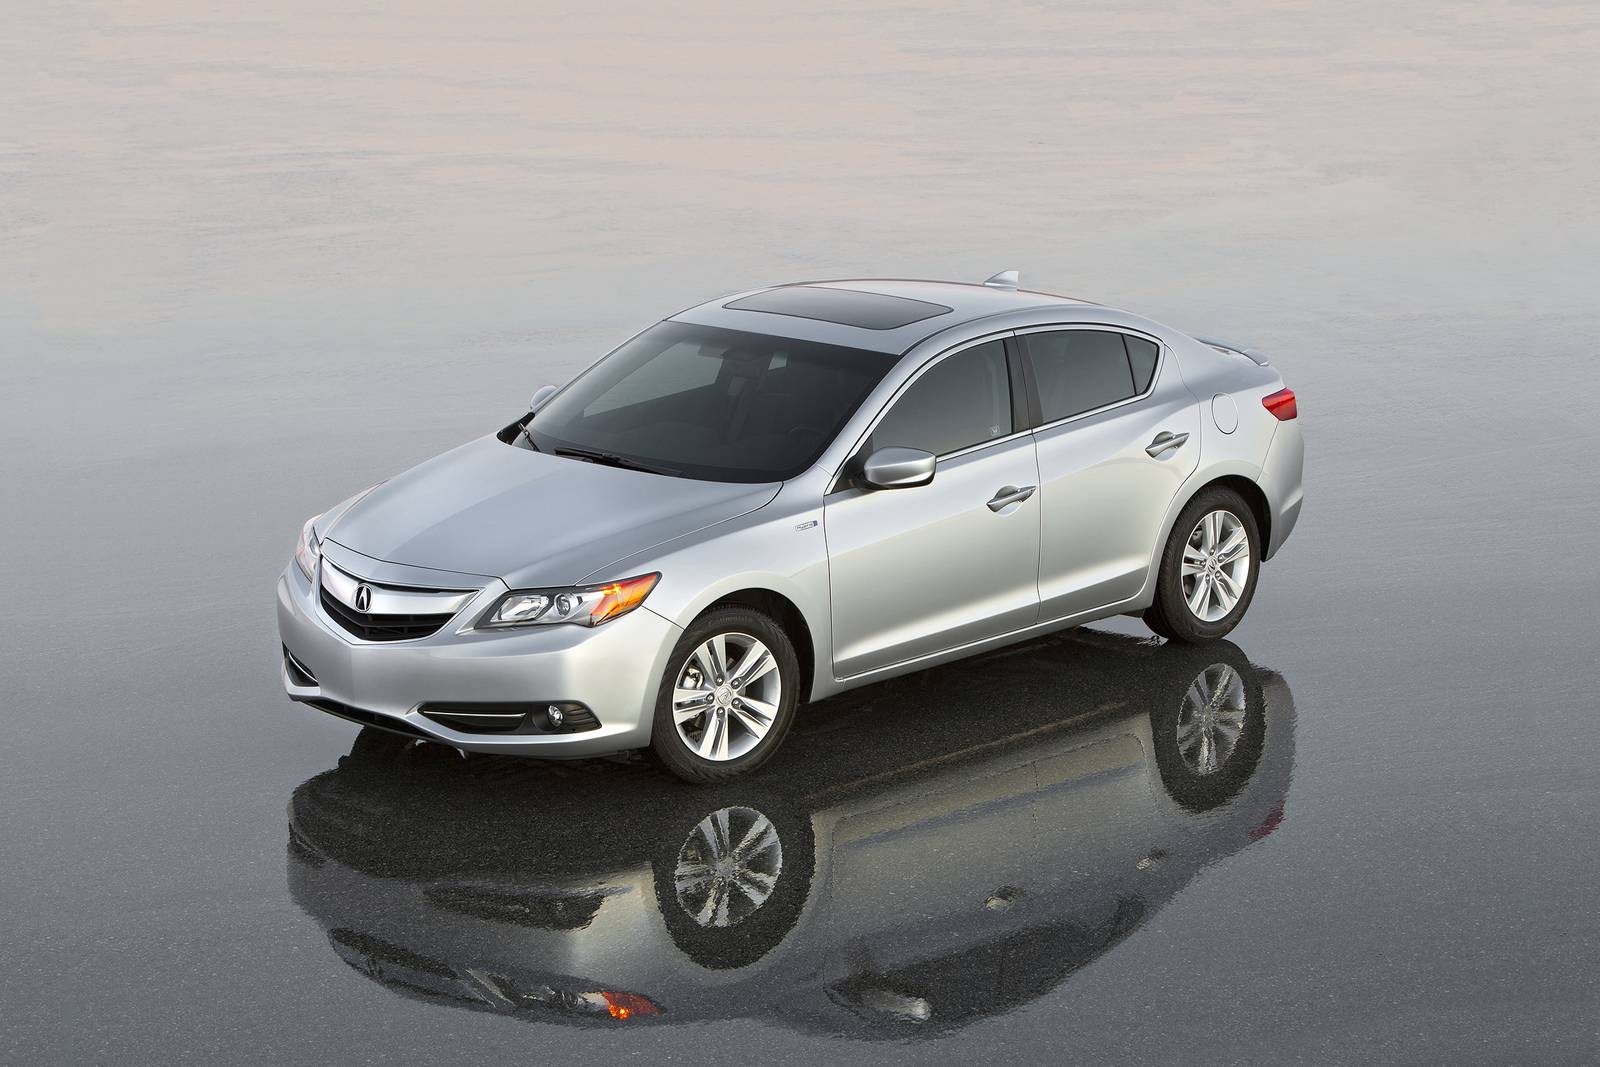 2014 Acura ILX Hybrid Review & Ratings | Edmunds